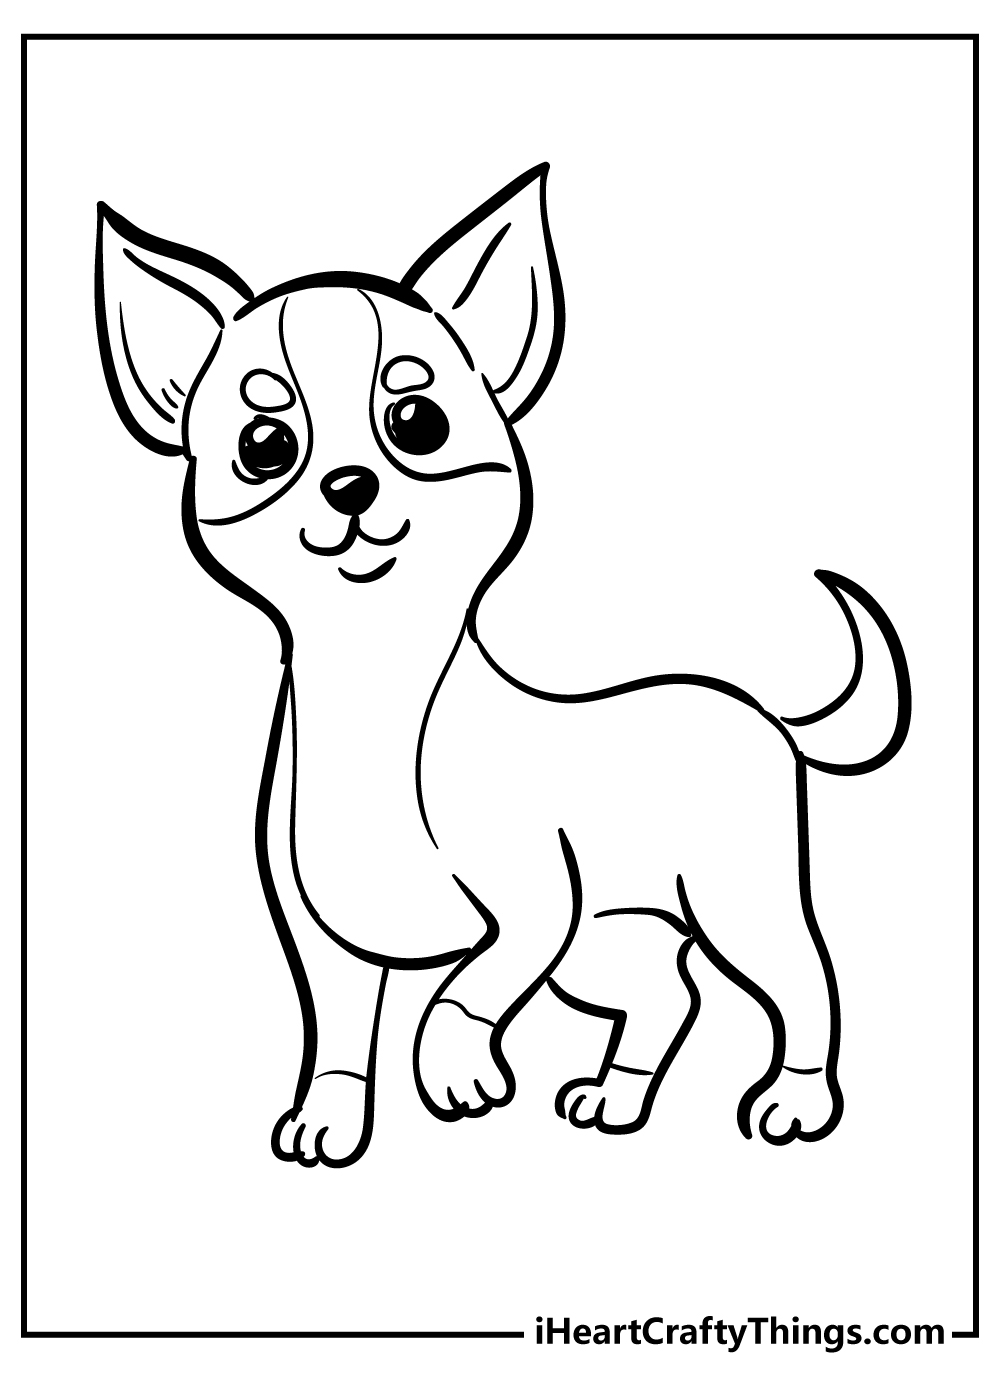 Chihuahua Coloring Pages free pdf download